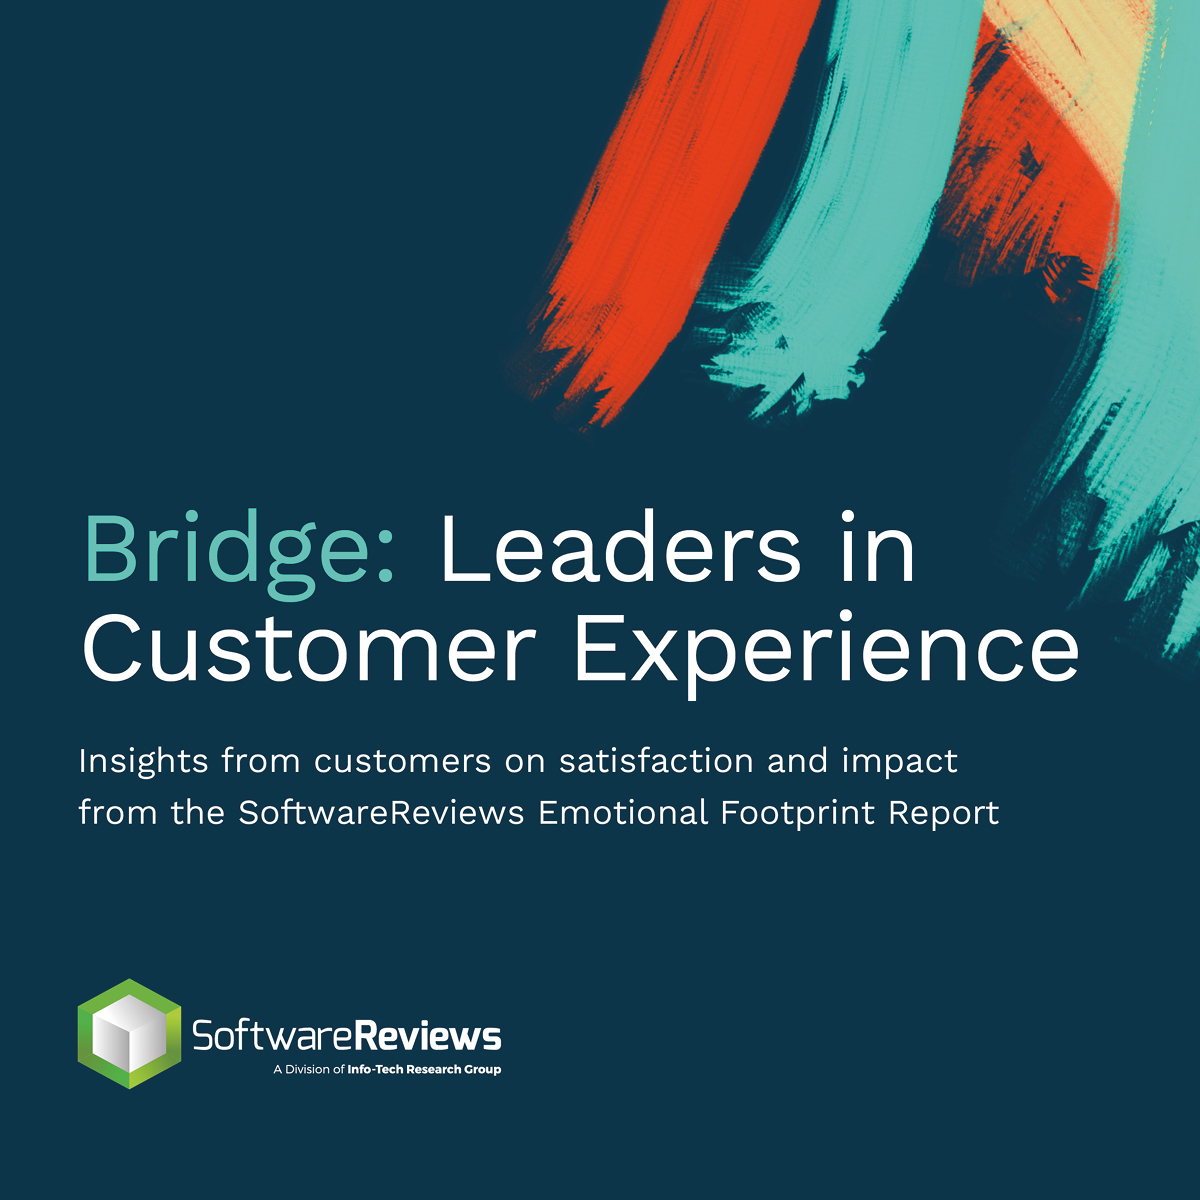 Info-Tech's Software Reviews has named Bridge an Emotional Footprint Champion in the LMS midmarket category based on customer satisfaction and product impact.